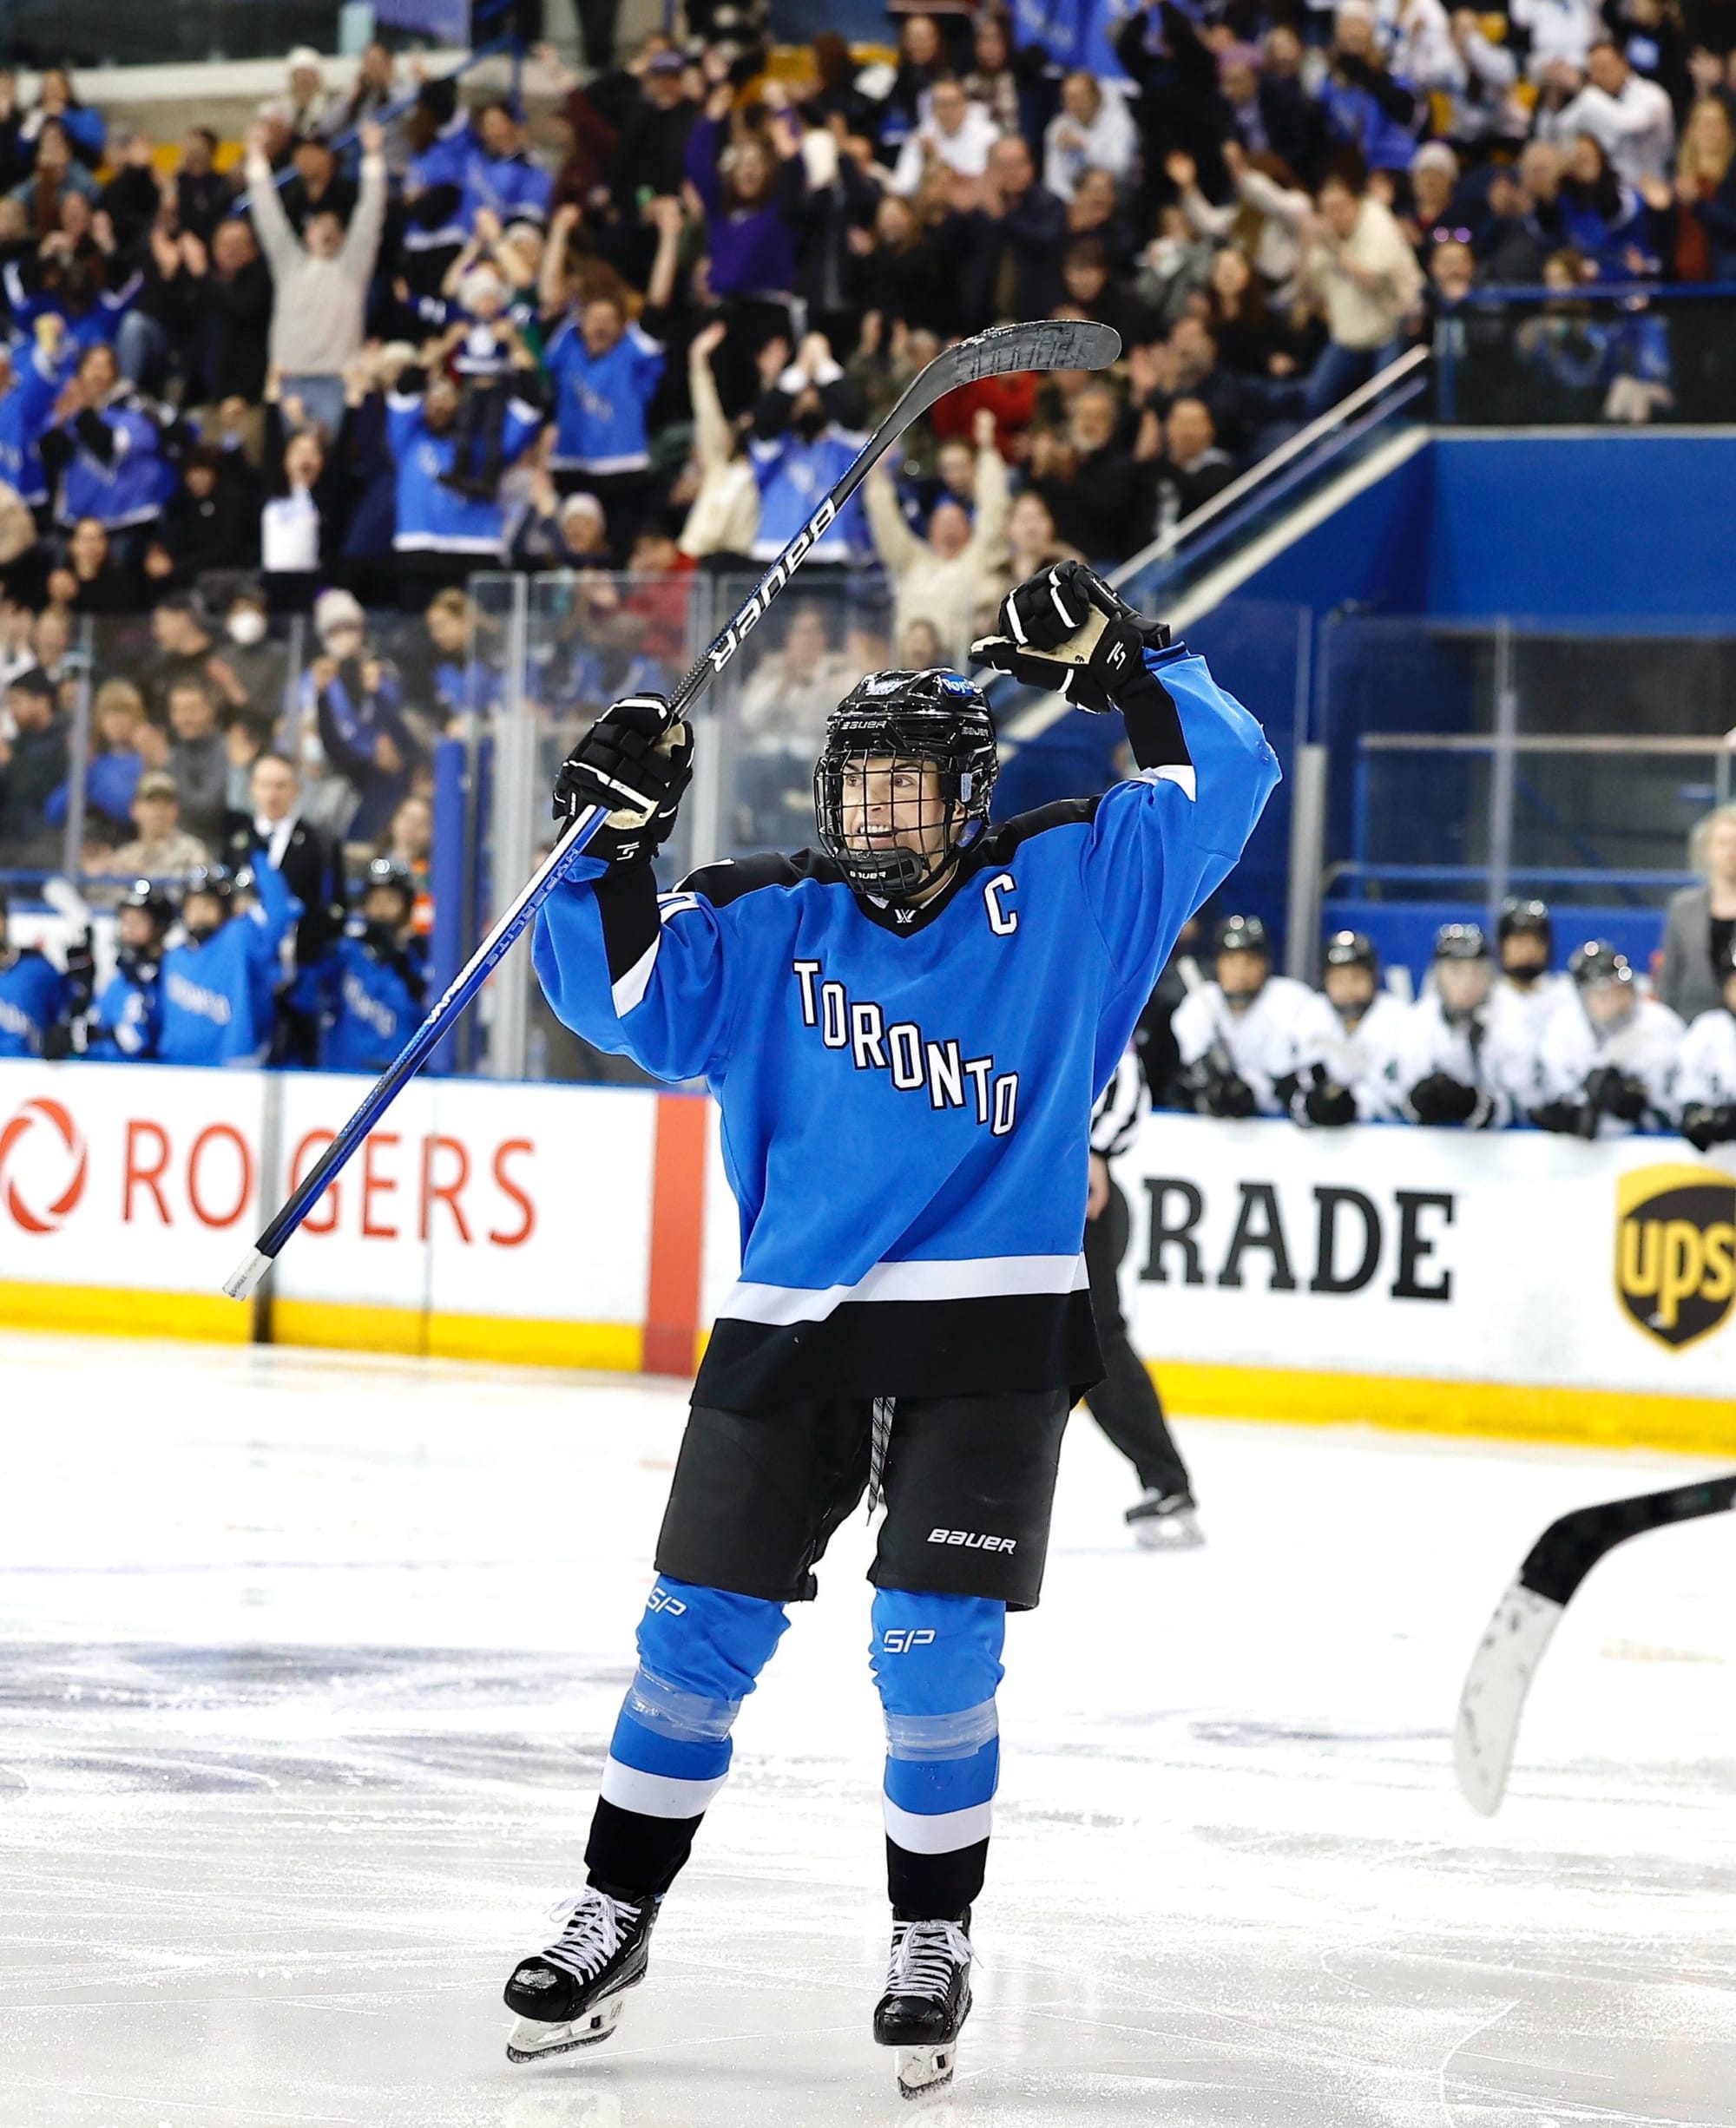 Blayre Turnbull celebrates a goal against Boston. Her arms are raised above her head in celebration. She is wearing a blue home uniform.